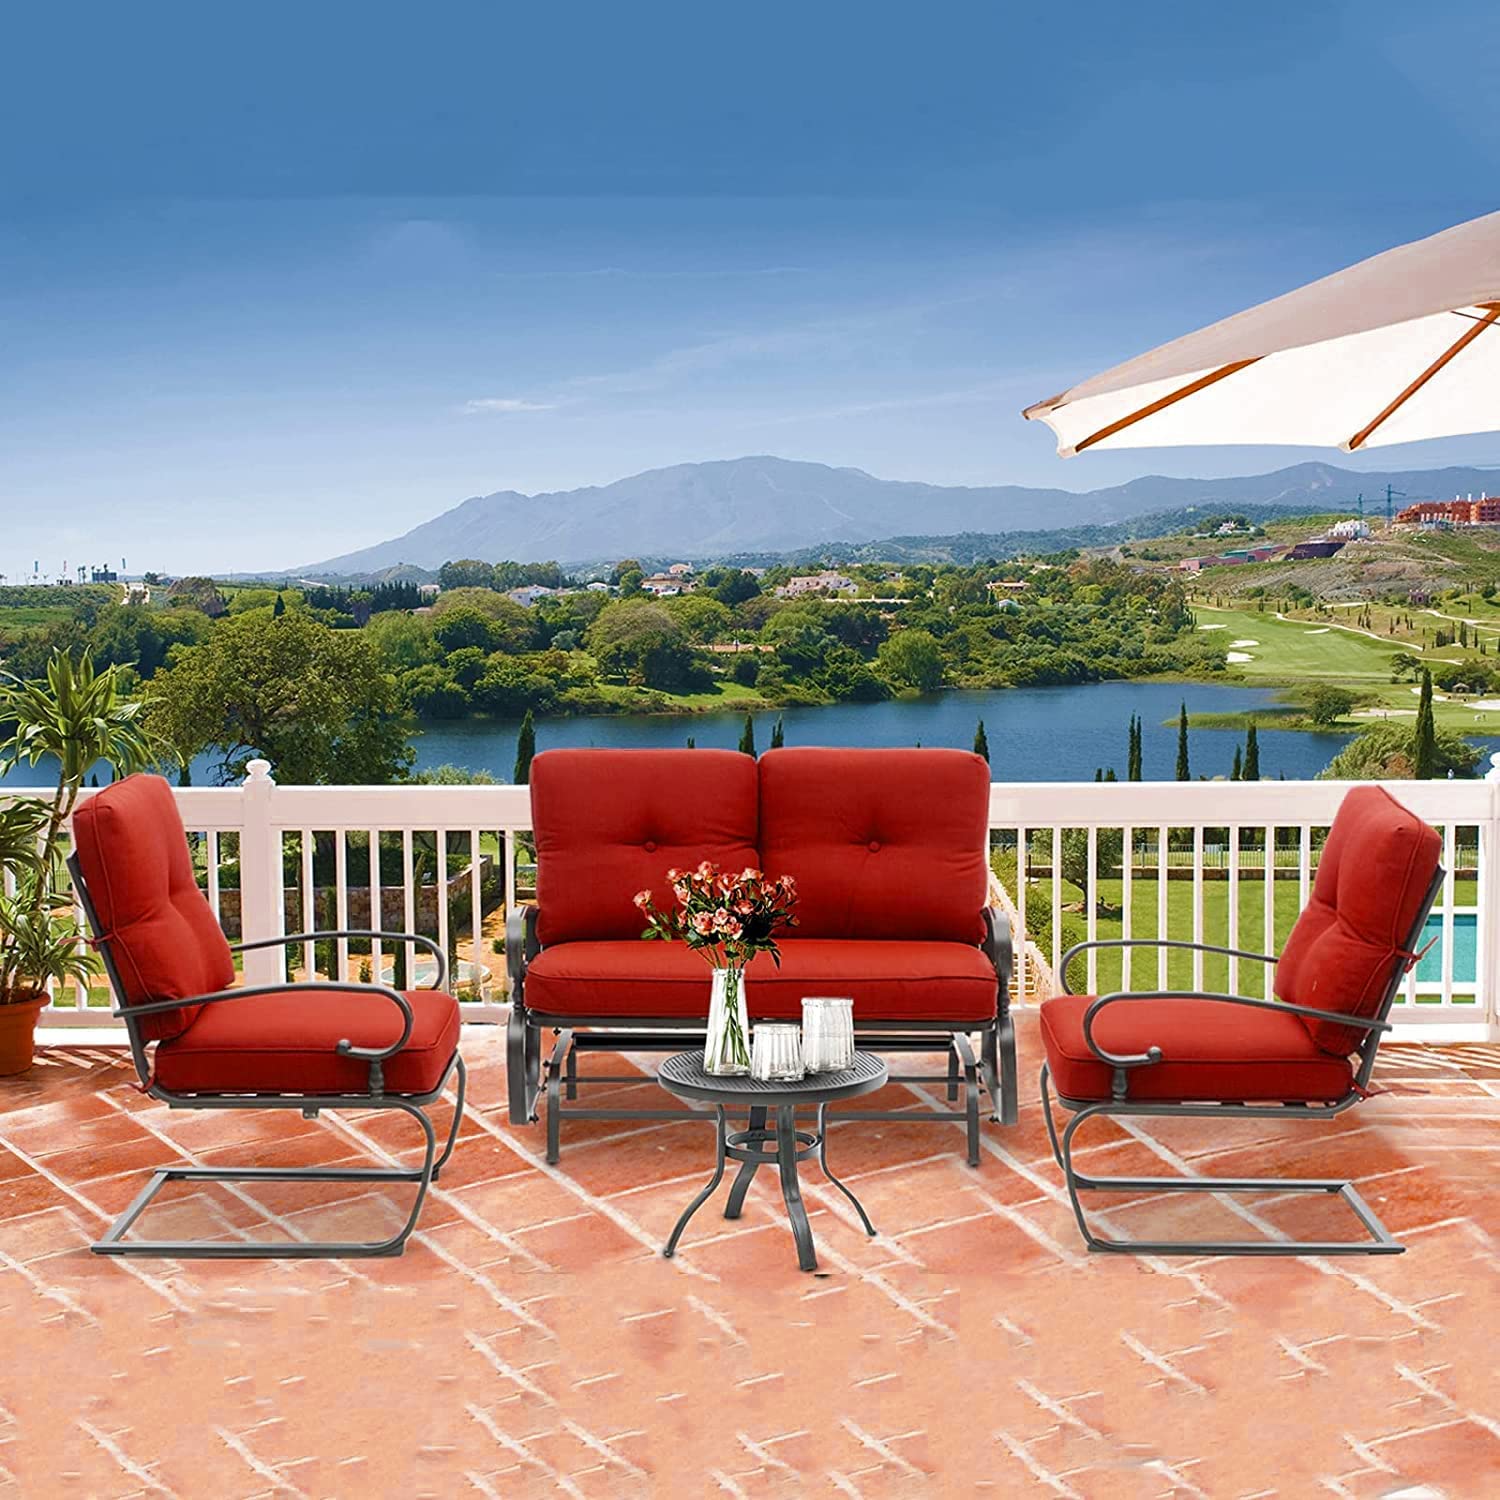 SUNCROWN 4-Piece Outdoor Patio Furniture Set Wrought Iron Conversation Sets, Red - image 4 of 8